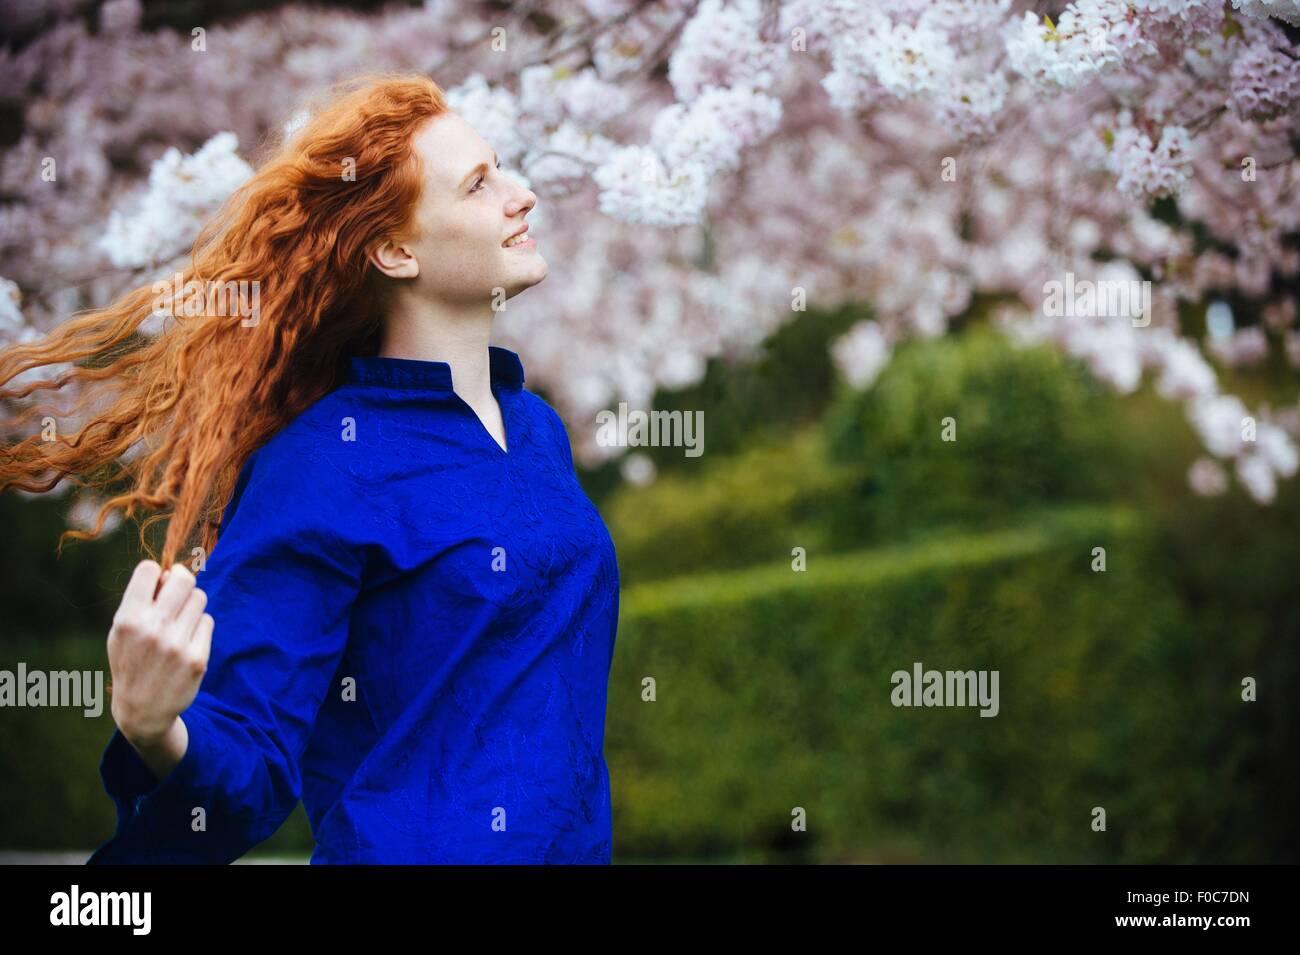 Portrait of young woman with long wavy red hair in spring park Stock Photo